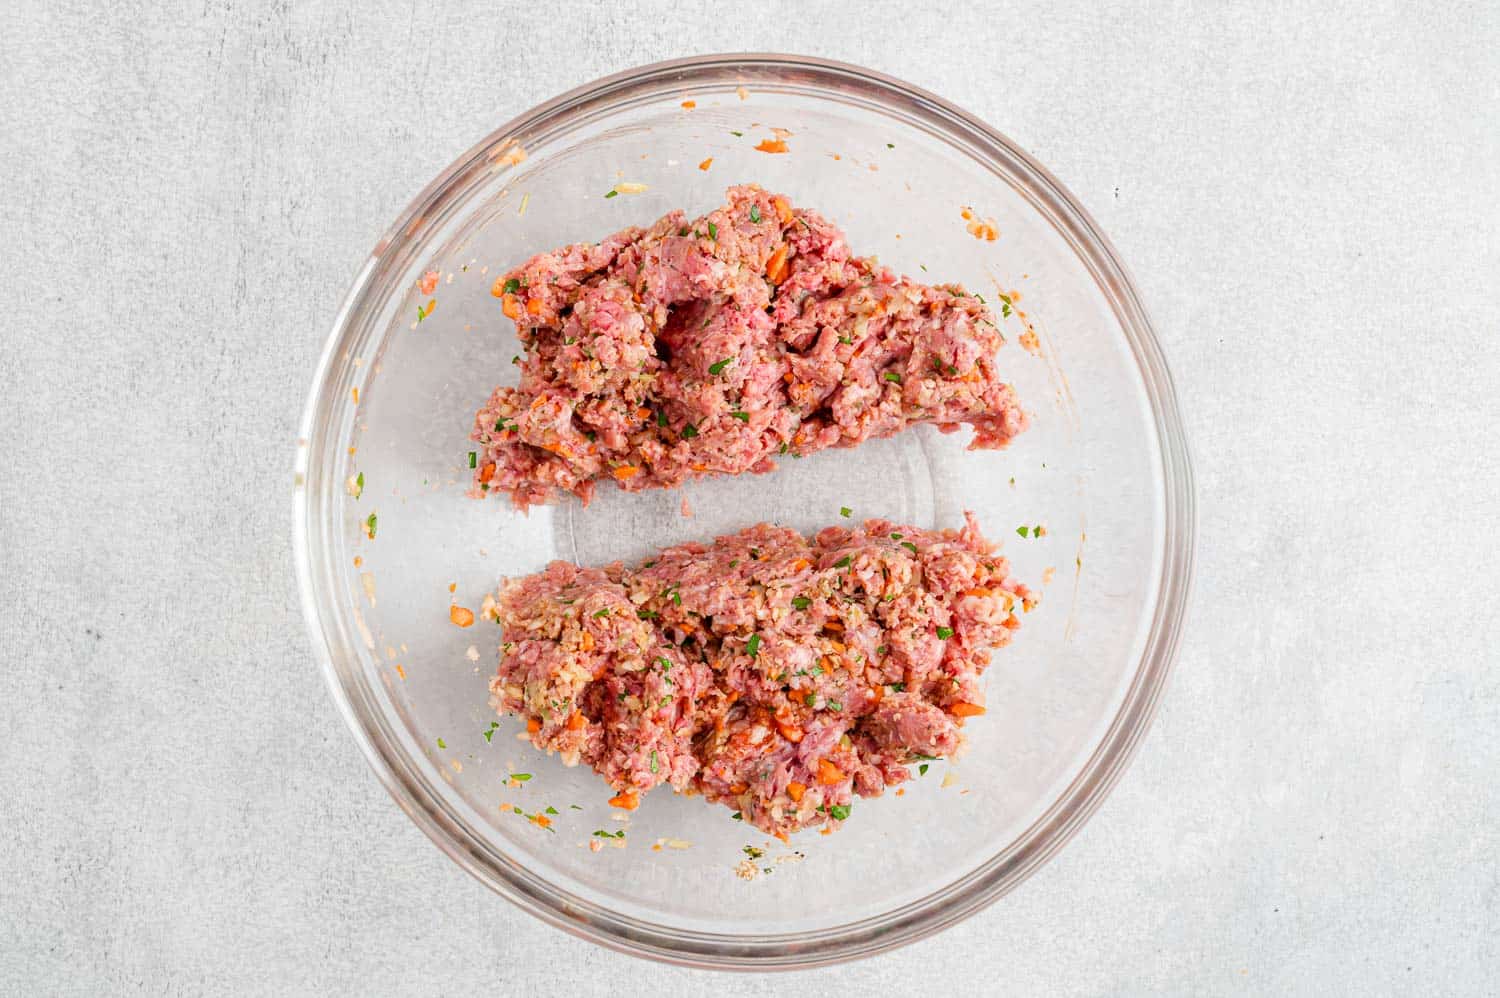 Meatloaf mixture formed into two portions.